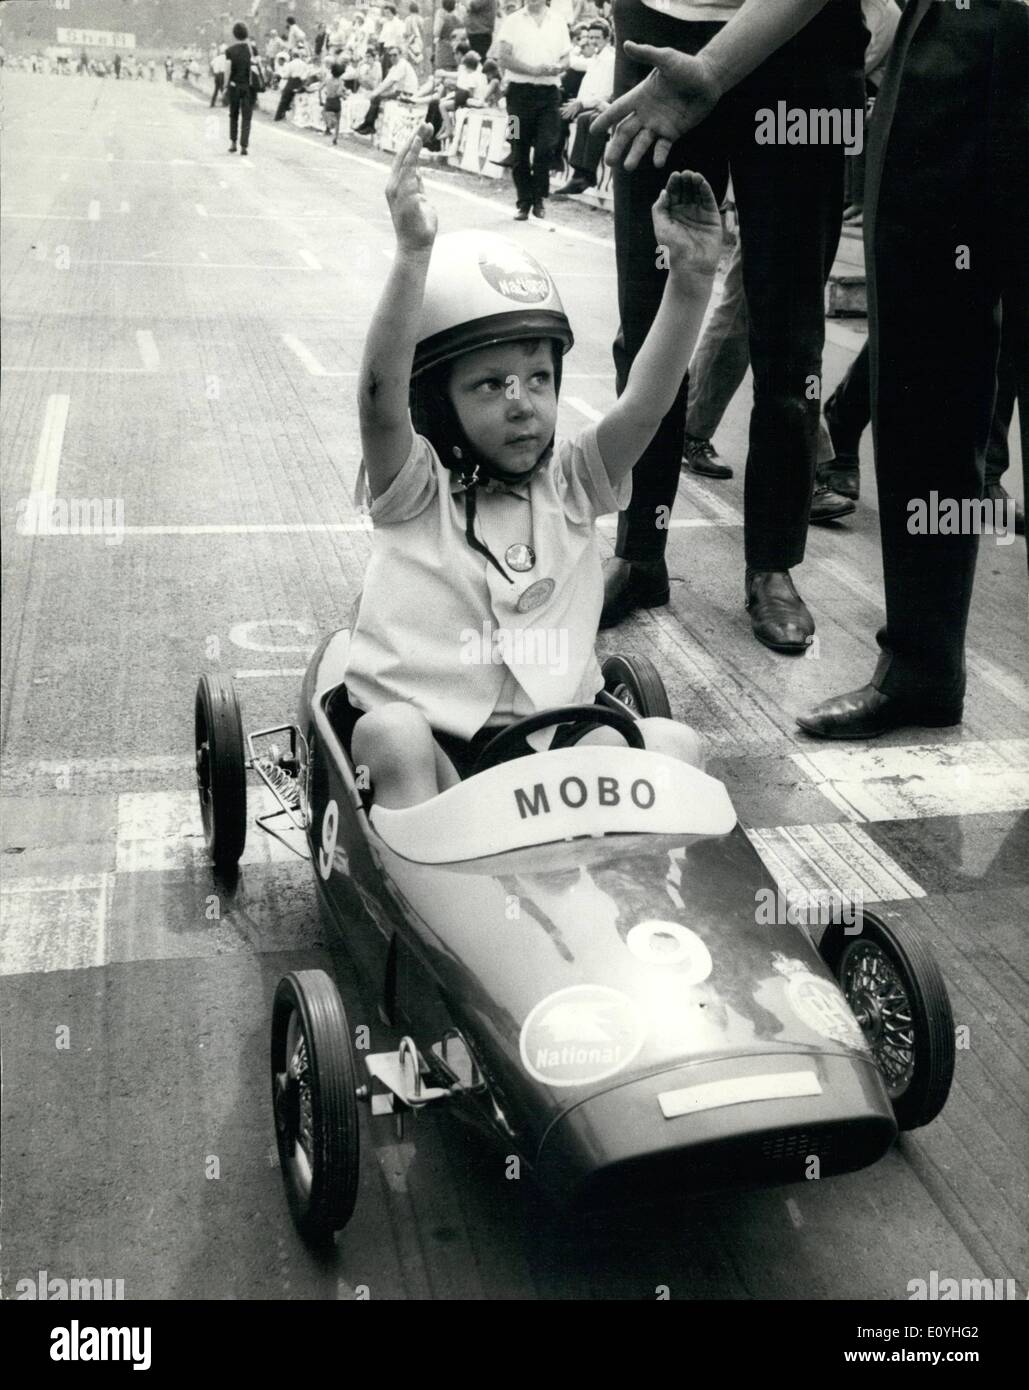 Jun. 06, 1970 - The Rac ''Junior Grand Prix'' At Crystal Palace: Britain's young aspiring drivers took part today in the RAC ''Junior Grand Prix'' at Crystal Palace. The competitors. boys and girls aged 6 and under were at the controls of ''pedal-powered'' mini-racing cars as they made a 75-yard dash down a section of the motor racing circuit normally used by the more experienced racing drivers. The winner's prize was the car he drove to victory Stock Photo